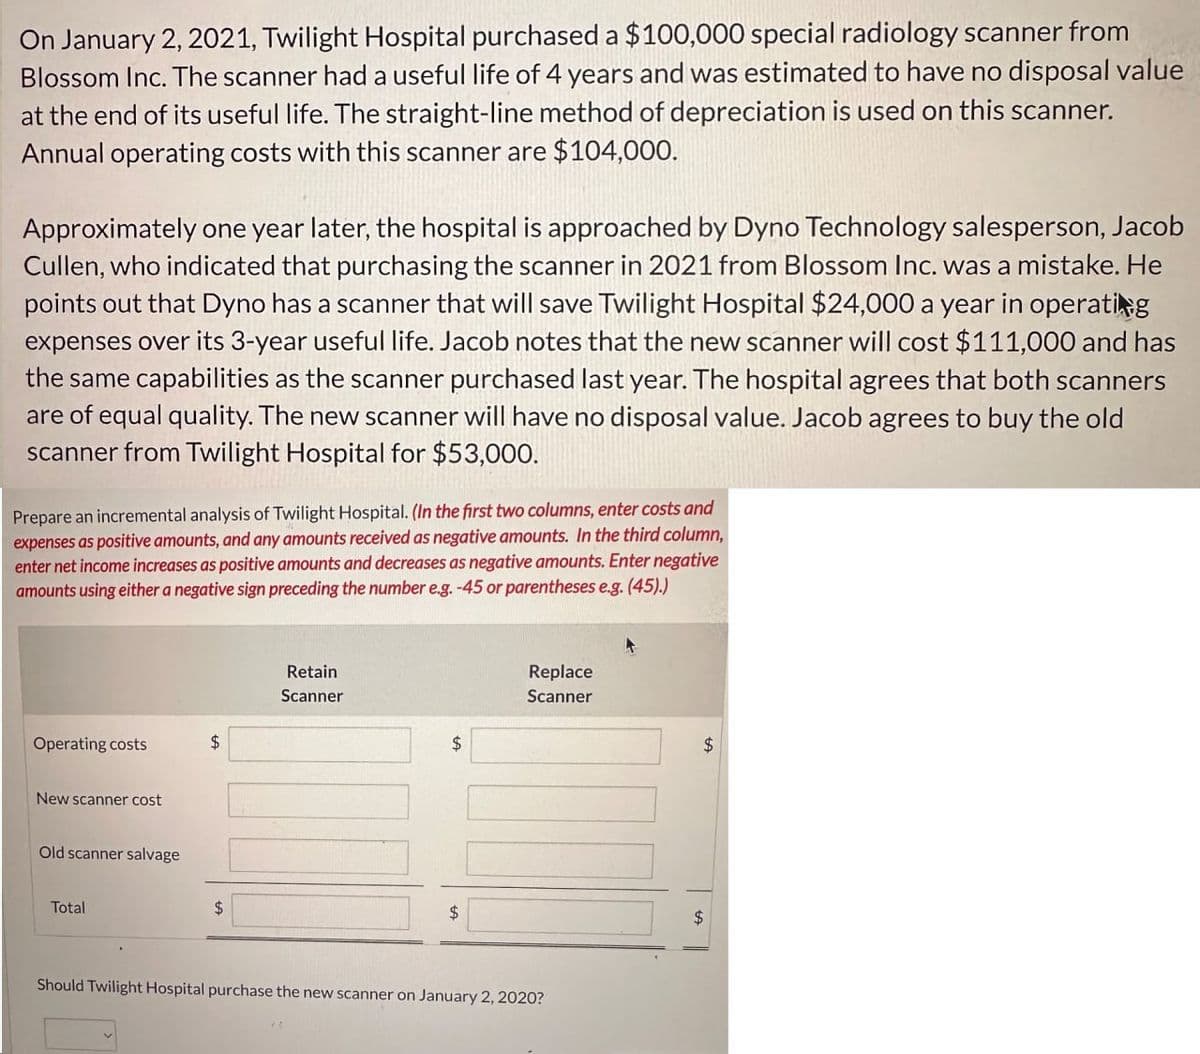 On January 2, 2021, Twilight Hospital purchased a $100,000 special radiology scanner from
Blossom Inc. The scanner had a useful life of 4 years and was estimated to have no disposal value
at the end of its useful life. The straight-line method of depreciation is used on this scanner.
Annual operating costs with this scanner are $104,000.
Approximately one year later, the hospital is approached by Dyno Technology salesperson, Jacob
Cullen, who indicated that purchasing the scanner in 2021 from Blossom Inc. was a mistake. He
points out that Dyno has a scanner that will save Twilight Hospital $24,000 a year in operating
expenses over its 3-year useful life. Jacob notes that the new scanner will cost $111,000 and has
the same capabilities as the scanner purchased last year. The hospital agrees that both scanners
are of equal quality. The new scanner will have no disposal value. Jacob agrees to buy the old
scanner from Twilight Hospital for $53,000.
Prepare an incremental analysis of Twilight Hospital. (In the first two columns, enter costs and
expenses as positive amounts, and any amounts received as negative amounts. In the third column,
enter net income increases as positive amounts and decreases as negative amounts. Enter negative
amounts using either a negative sign preceding the number e.g. -45 or parentheses e.g. (45).)
Operating costs
New scanner cost
Old scanner salvage
Total
$
Retain
Scanner
$
$
Replace
Scanner
Should Twilight Hospital purchase the new scanner on January 2, 2020?
$
$